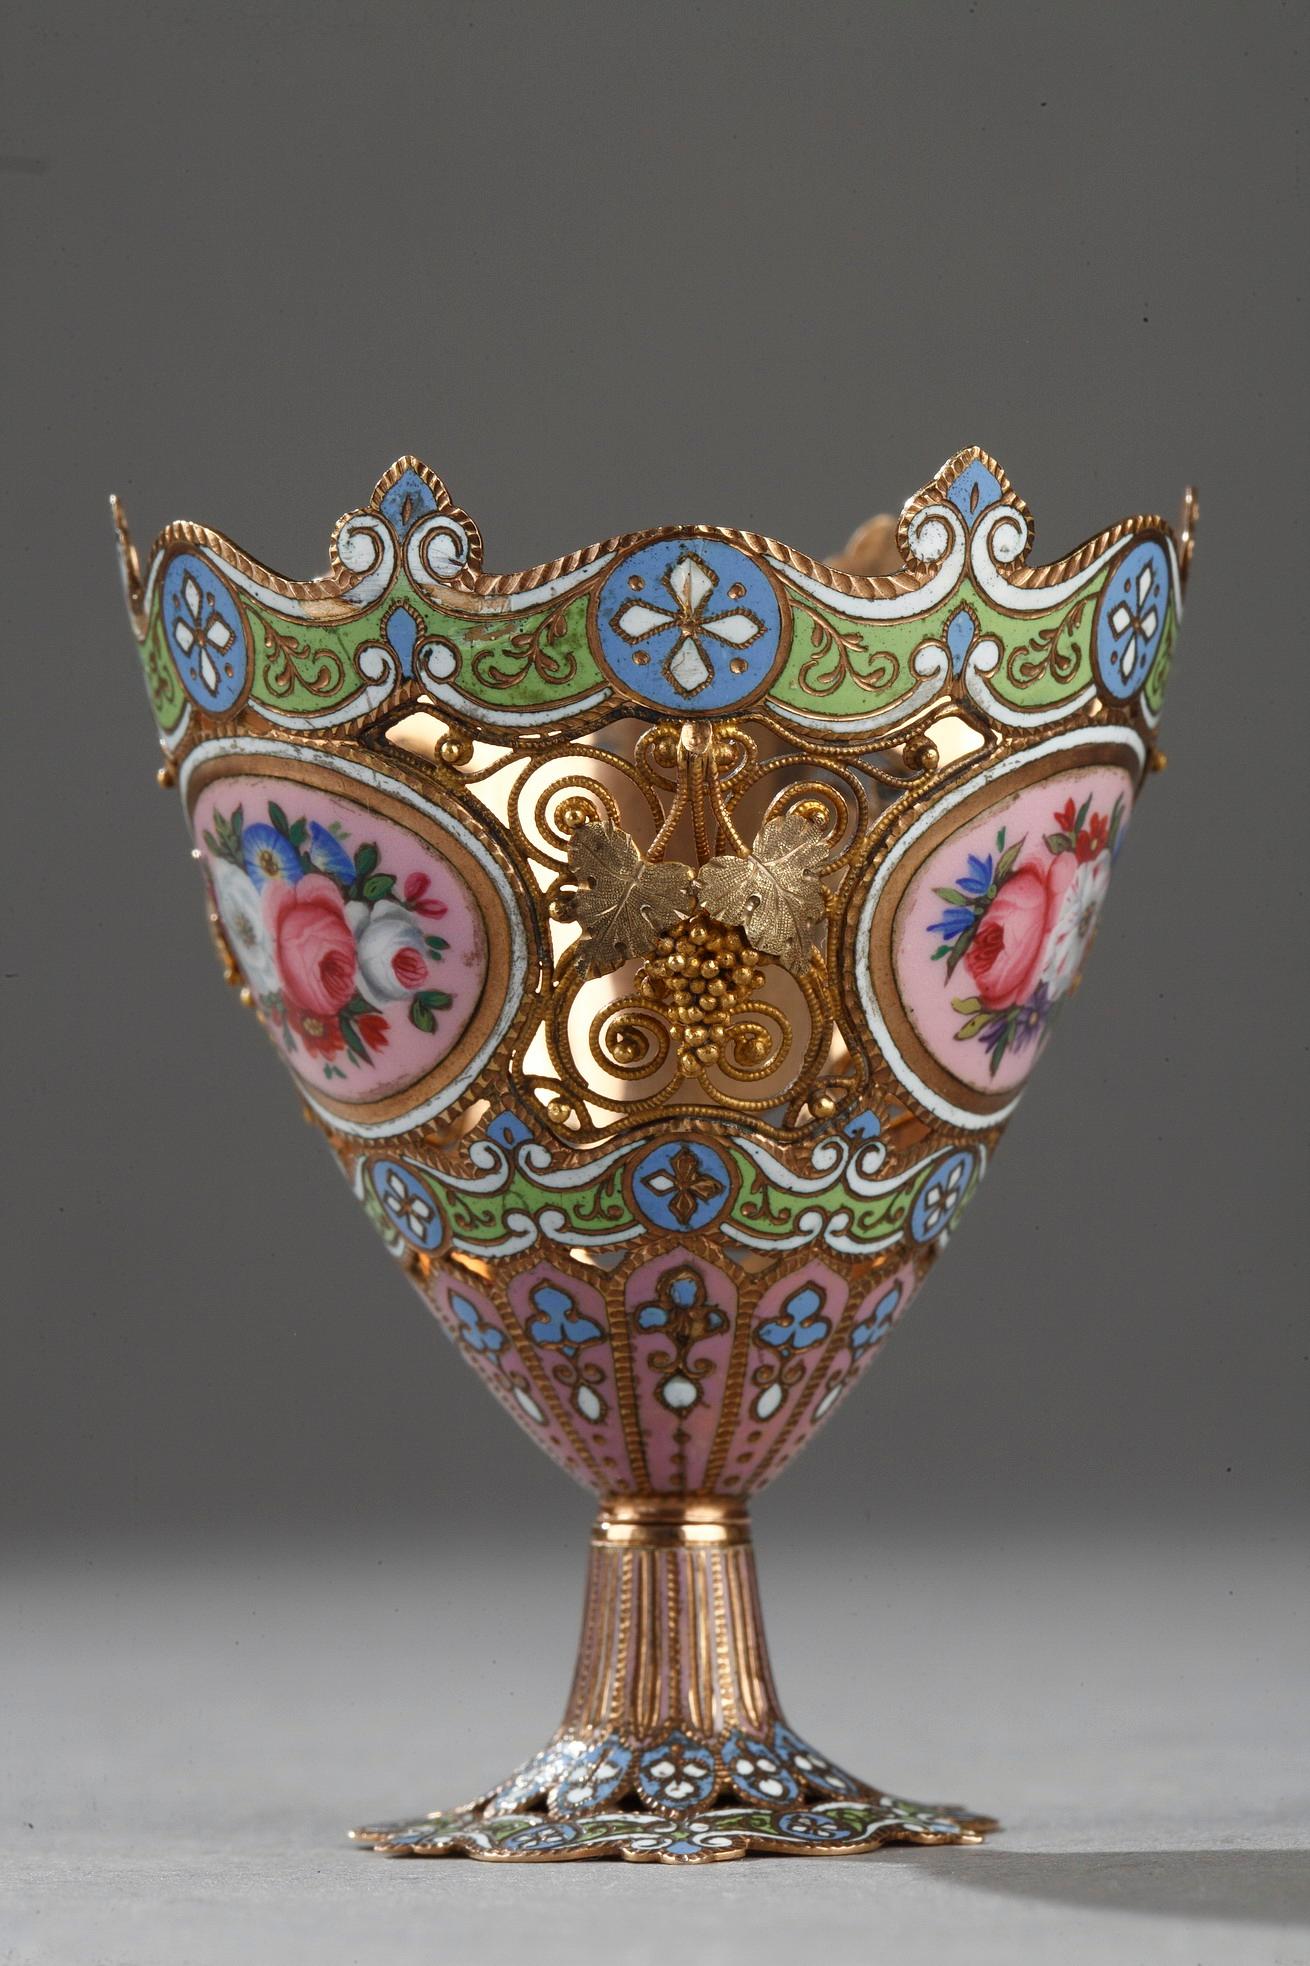 A gold and enamel zarf, pierced and enamelled. The collar is decorated with geometric patterns enamelled green and blue. The zarf has two medallions of pink enamel enhanced with floral motifs. The foot takes the geometric patterns of the